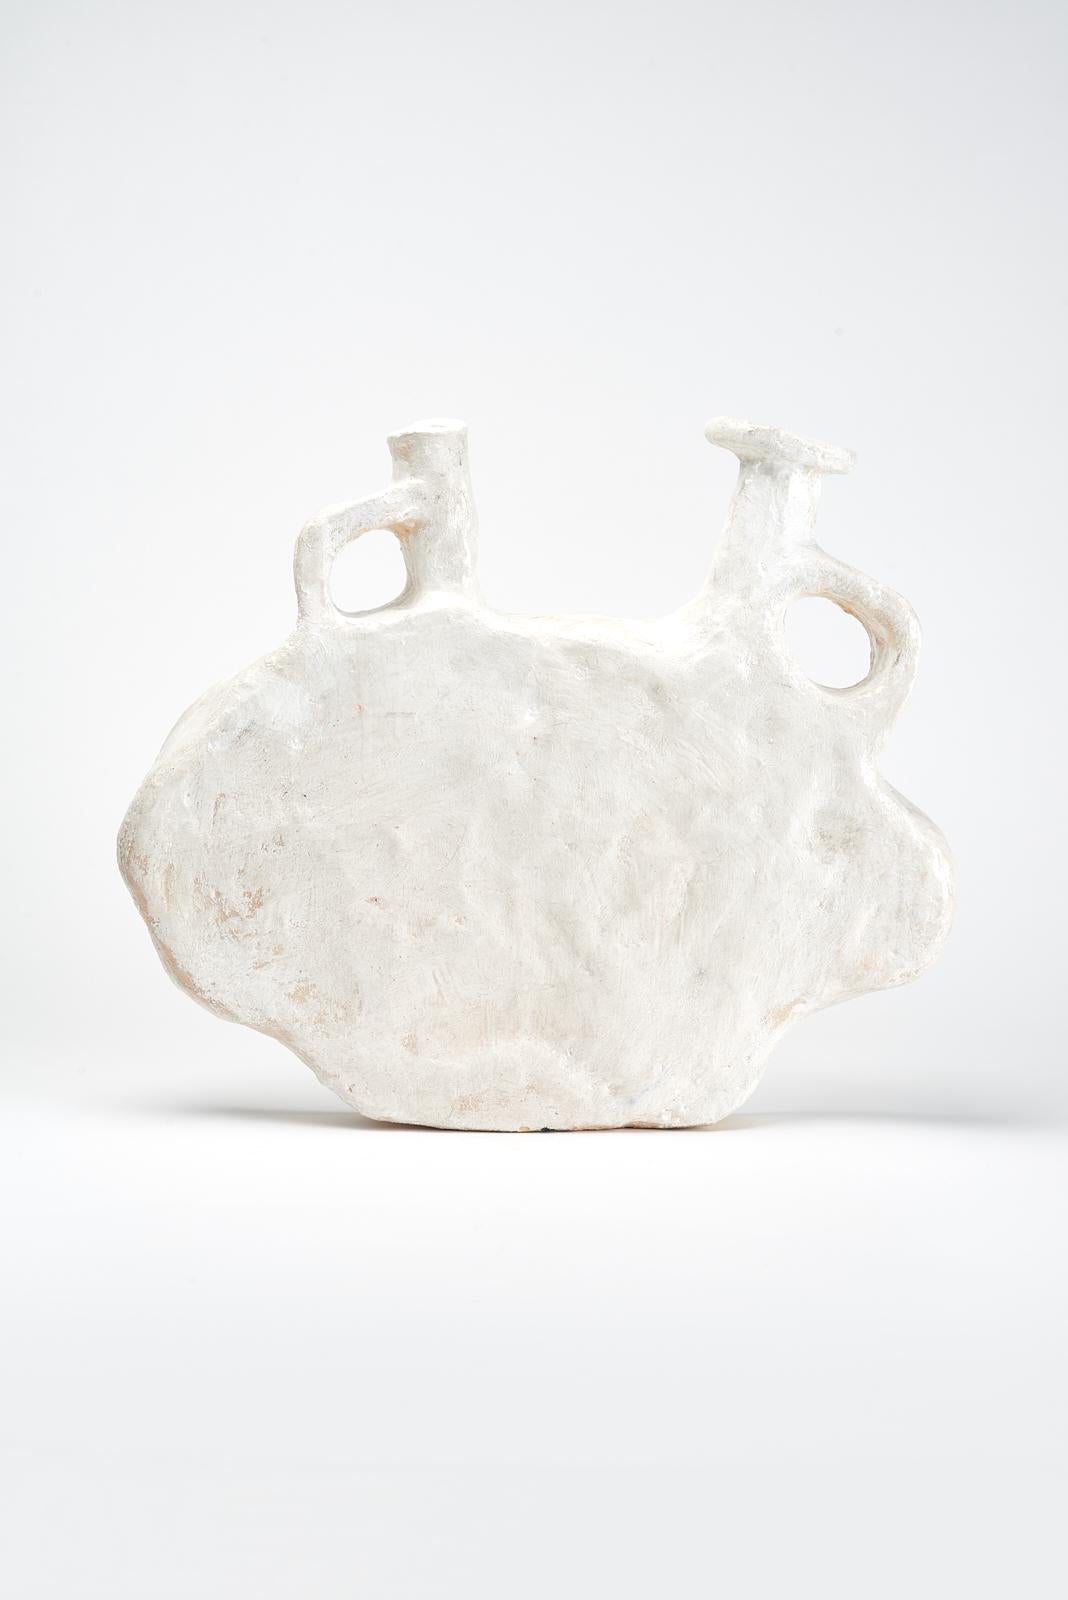 Bili Vase by Willem Van Hooff.
Dimensions: W 48 x D 7 x H 38 cm (Dimensions may vary as pieces are hand-made and might present slight variations in sizes)
Materials: Earthenware, ceramic, pigments and glaze.

Willem van Hooff is a designer based in